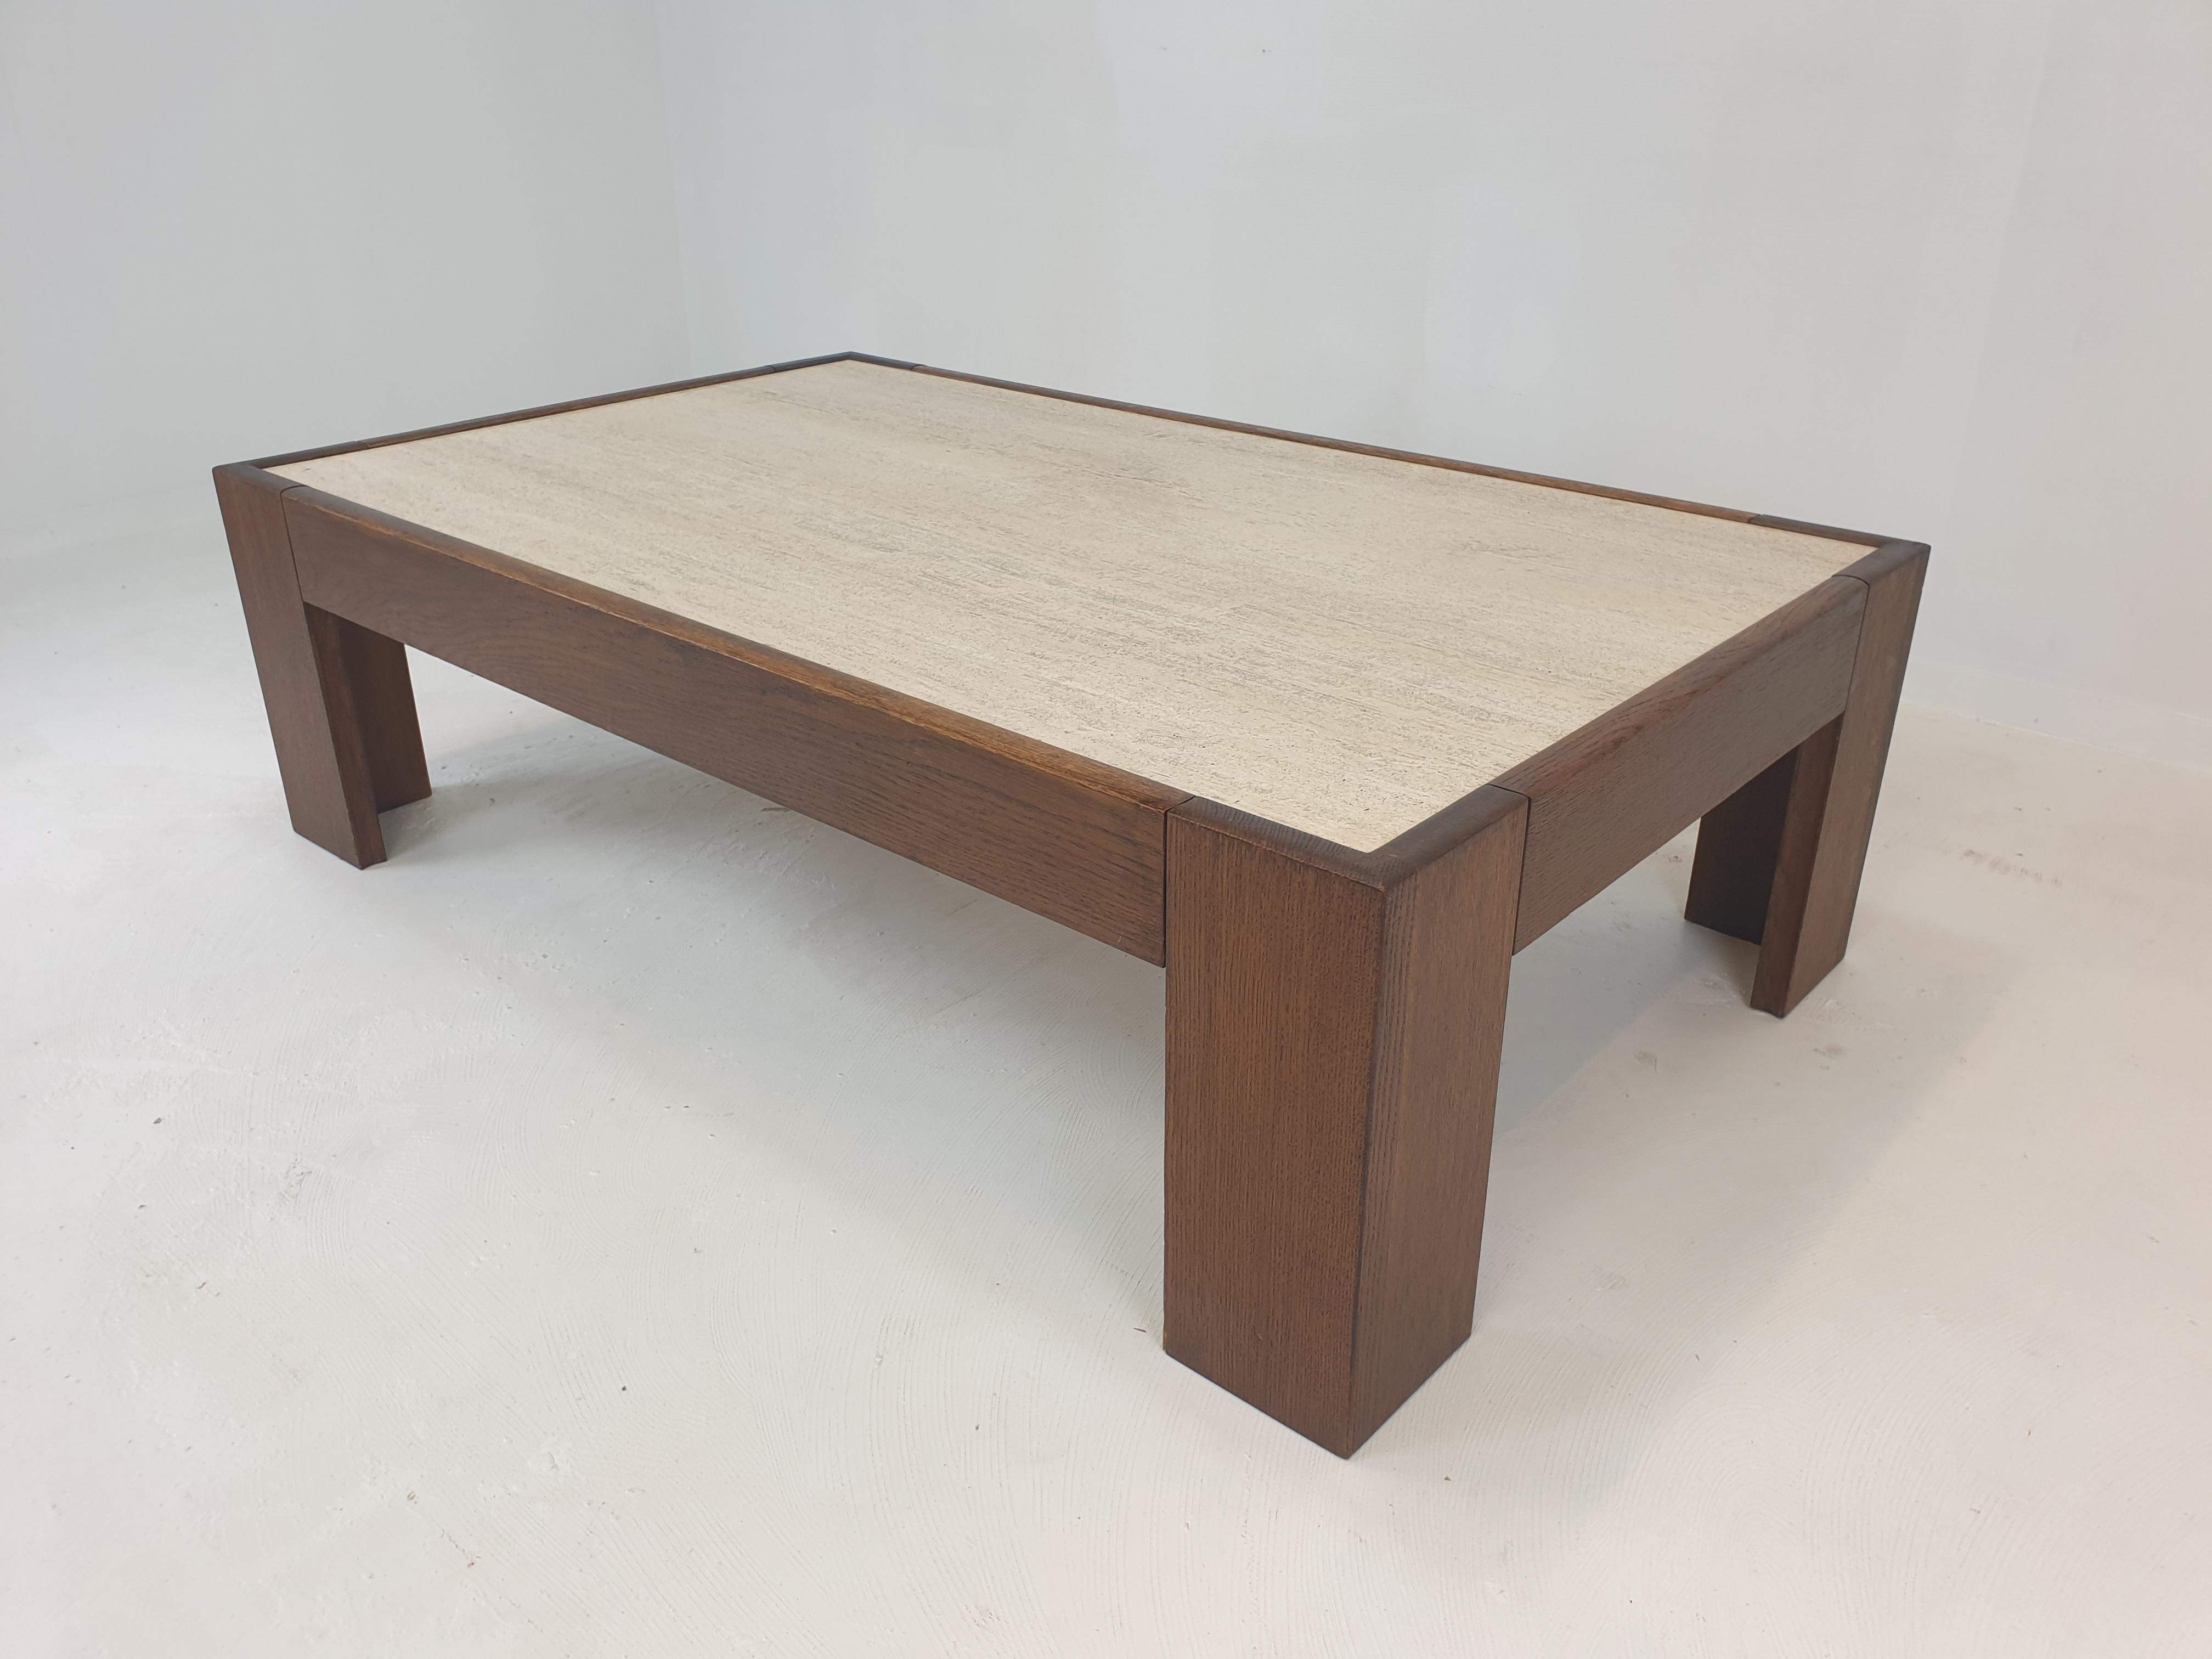 Very nice custom made coffee table from the 70's.
Fabricated in Belgium.

The solid frame is made of oak, it makes a stunning combination with the beautiful travertine plate.

We ship worldwide and we work with professional shippers and packers.